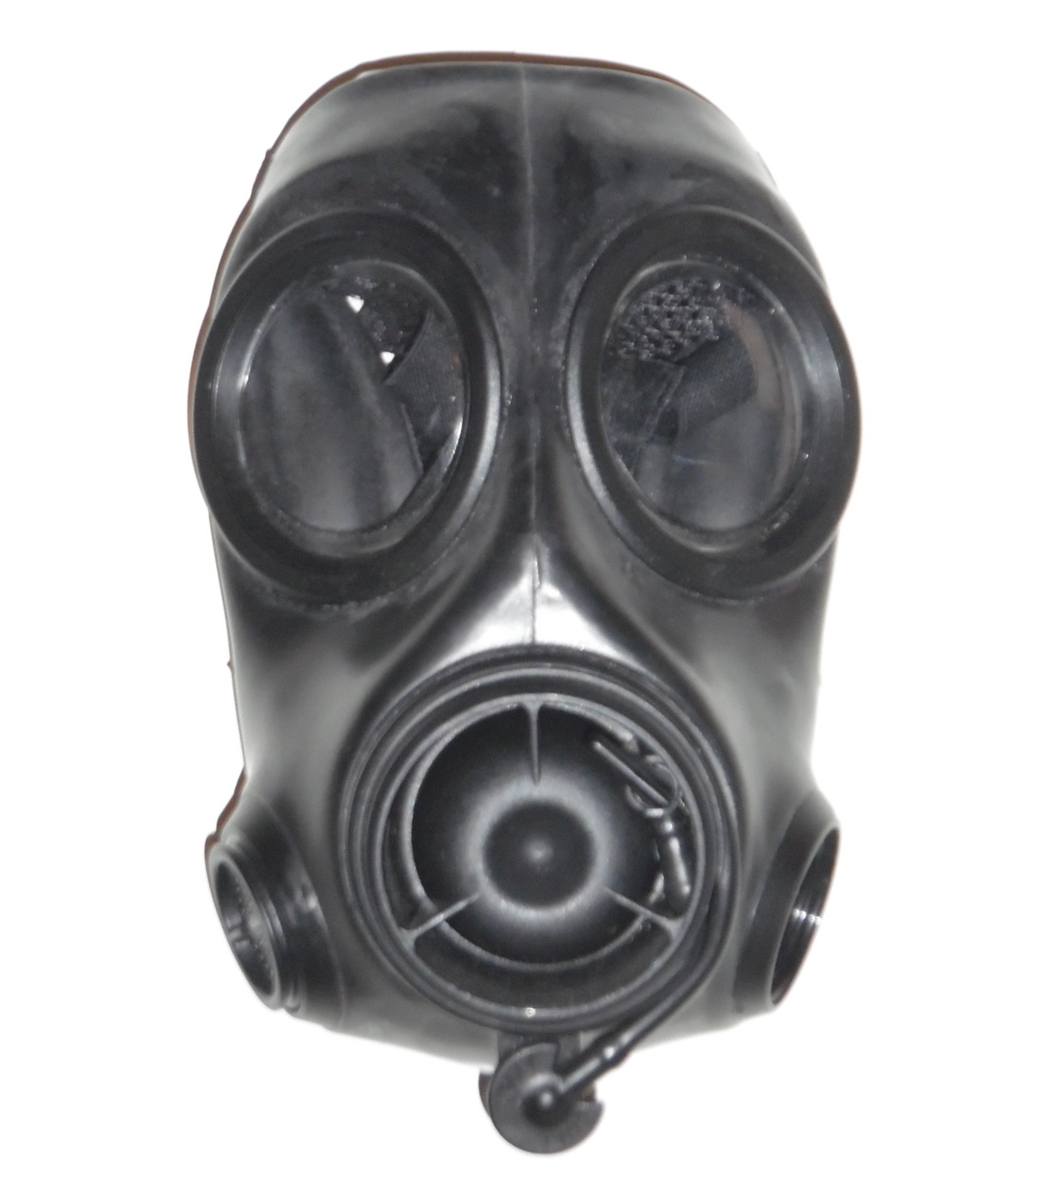 fm12 gas mask for sale